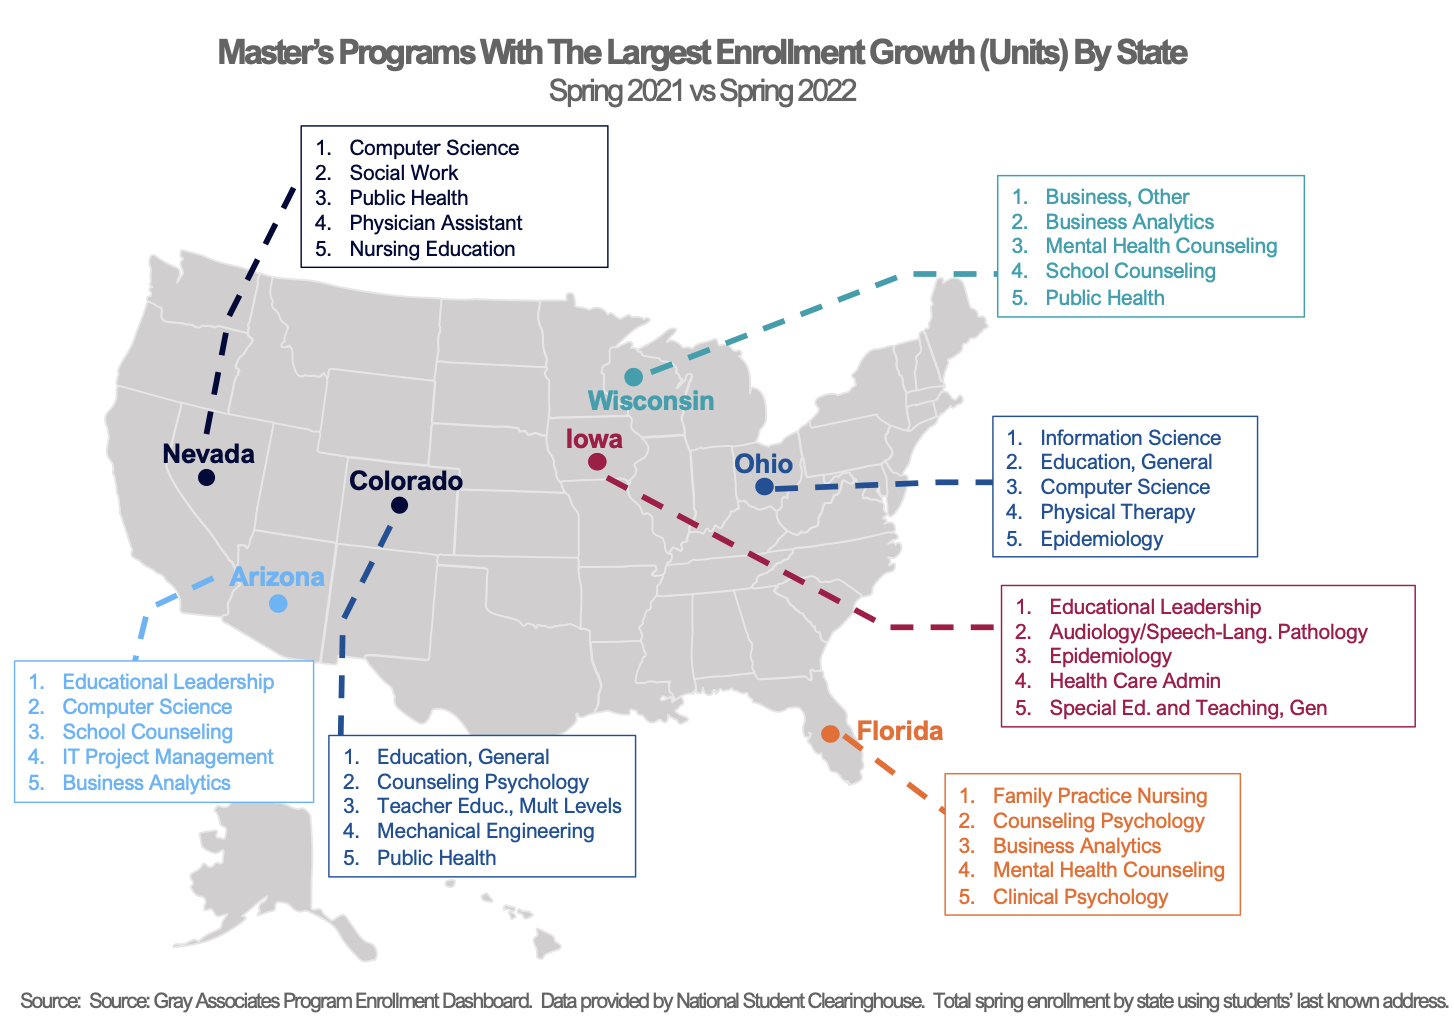 Masters Programs with the Largest Enrollment Growth (Units) by state